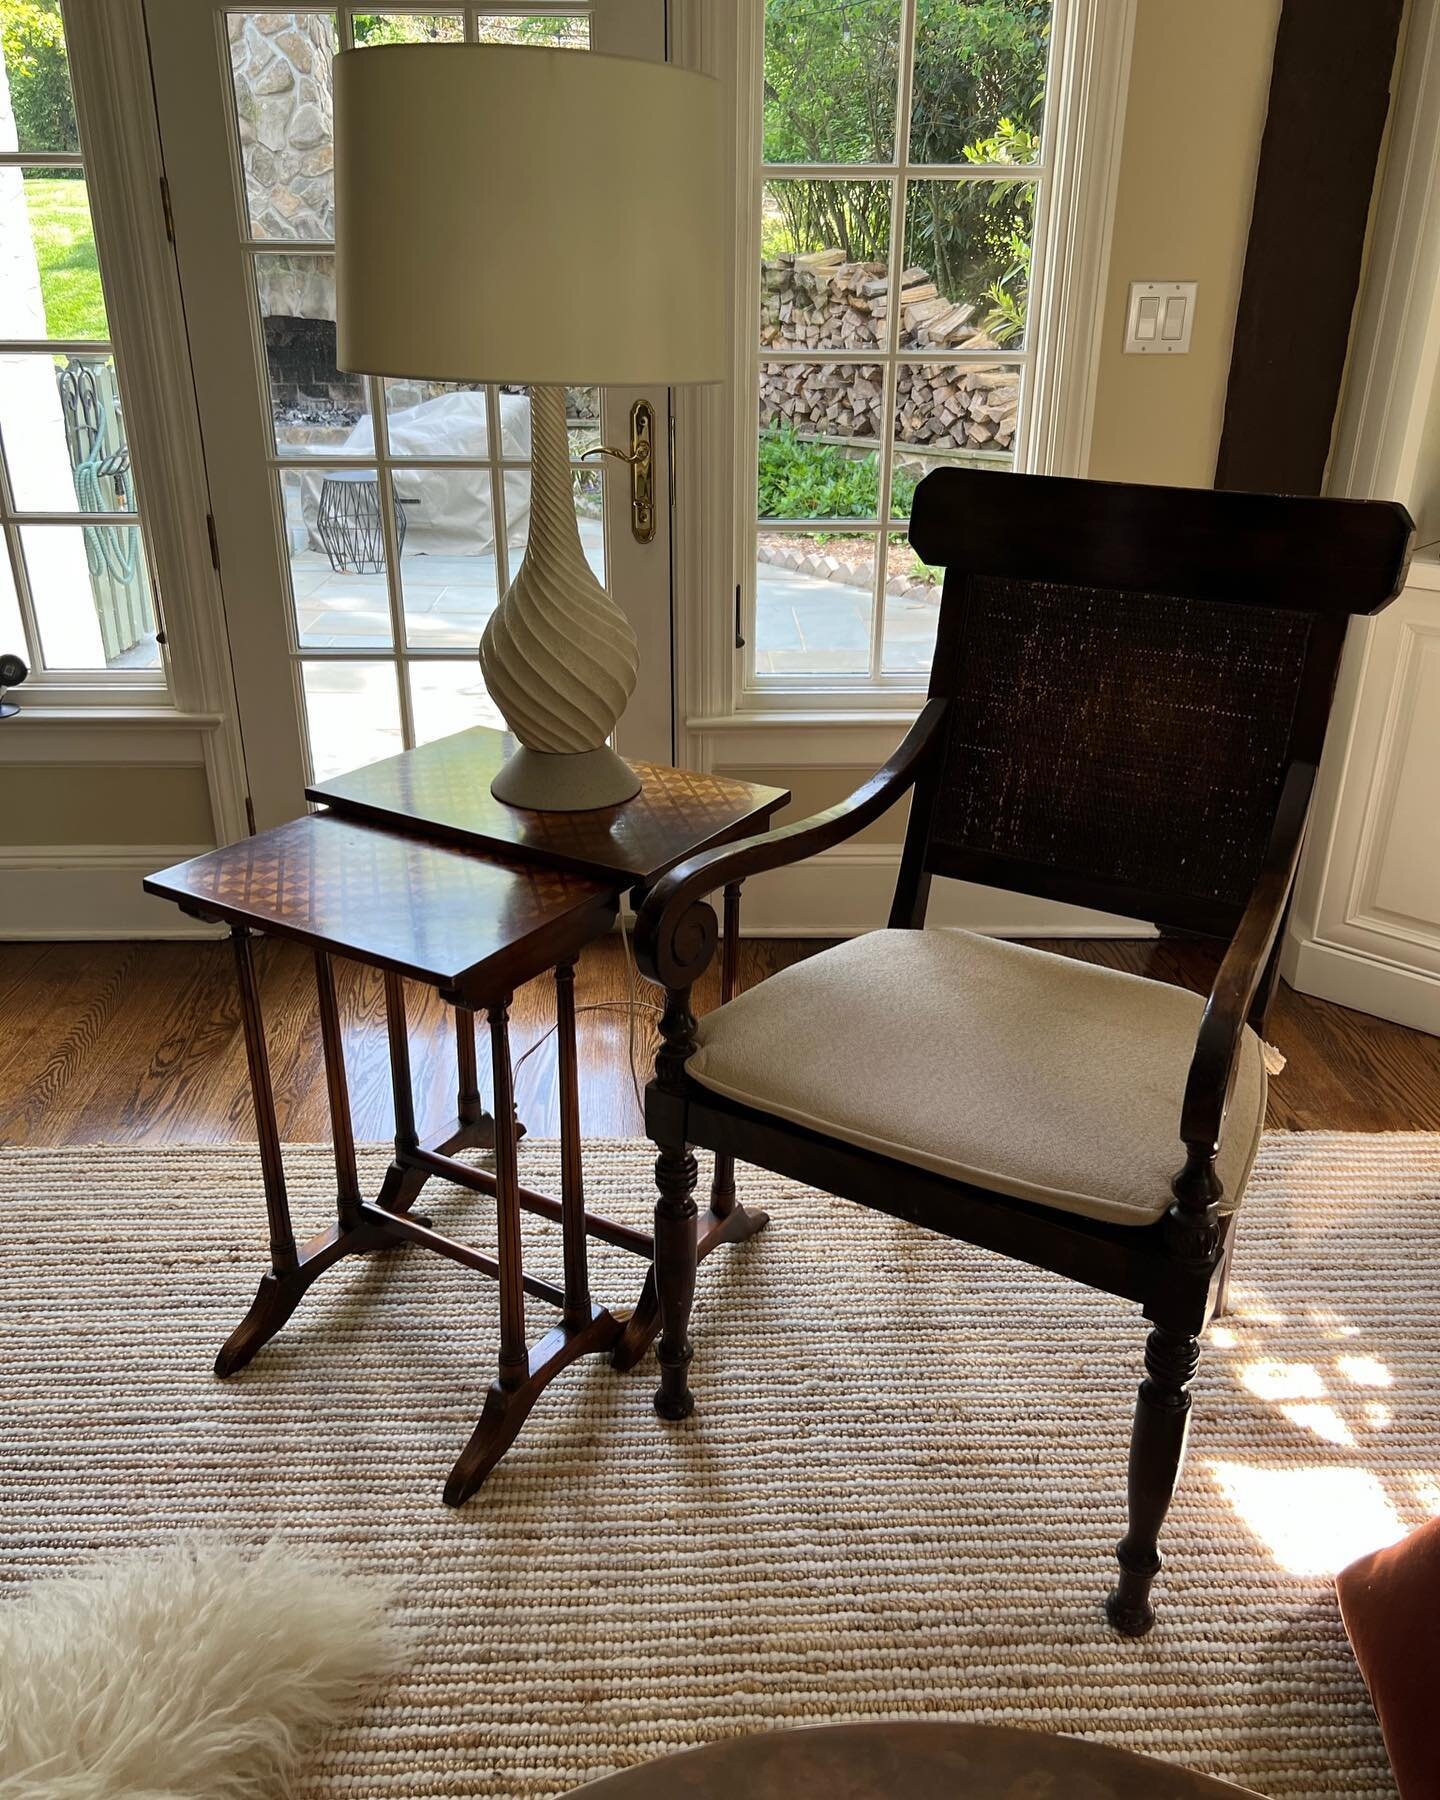 Guy Chaddock Carved Wood and Cane Chair 22.5w x 39.5h $275 Pair of Nesting Tables 25.75h x 19 x 12.5d
25h x 16.5 x 11.5d
$150 Ceramic Lamp
30 high x 8 base
$100 #emptyyournest #interiordesign #interiordesigner #homedecor #upcycling #estatesale #estat